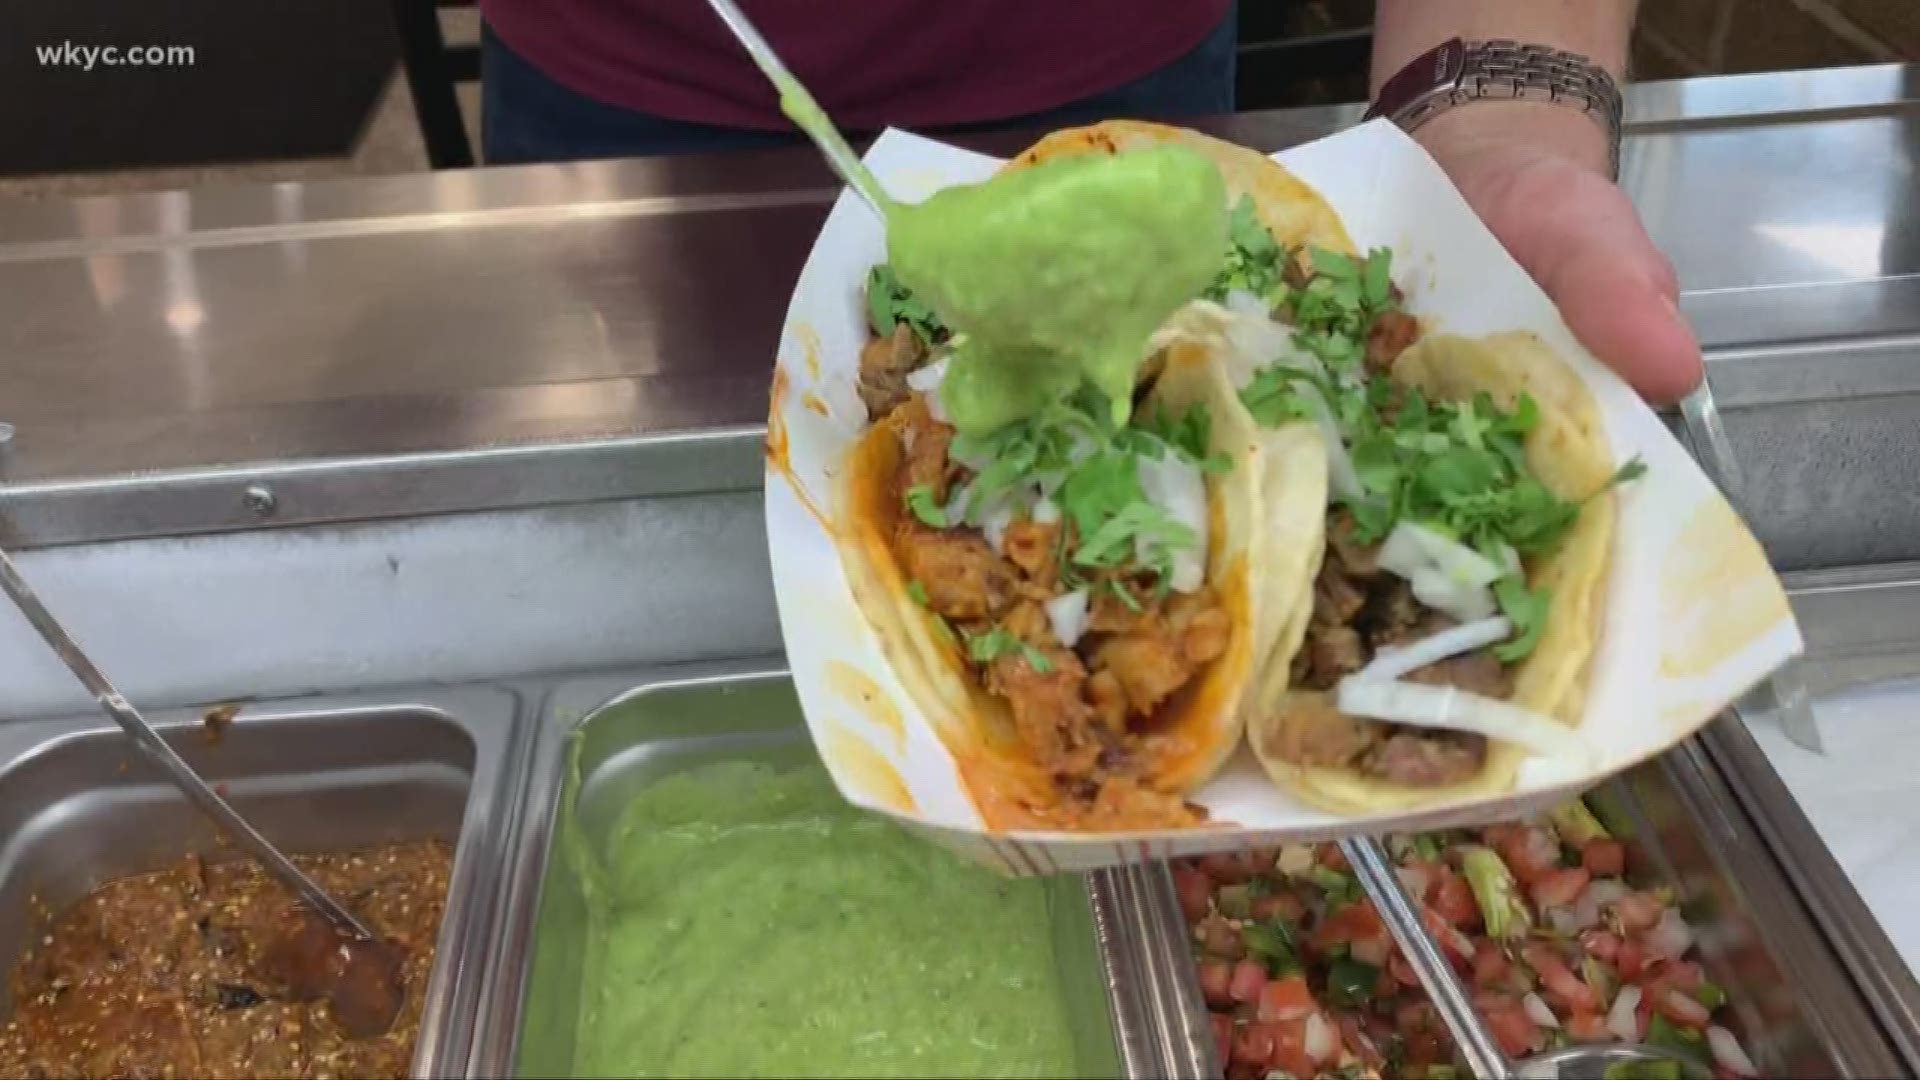 Oct. 4, 2019: In celebration of National Taco Day, we sent Austin Love on a journey to find the best eats. He landed at La Plaza Supermarket in Lakewood.